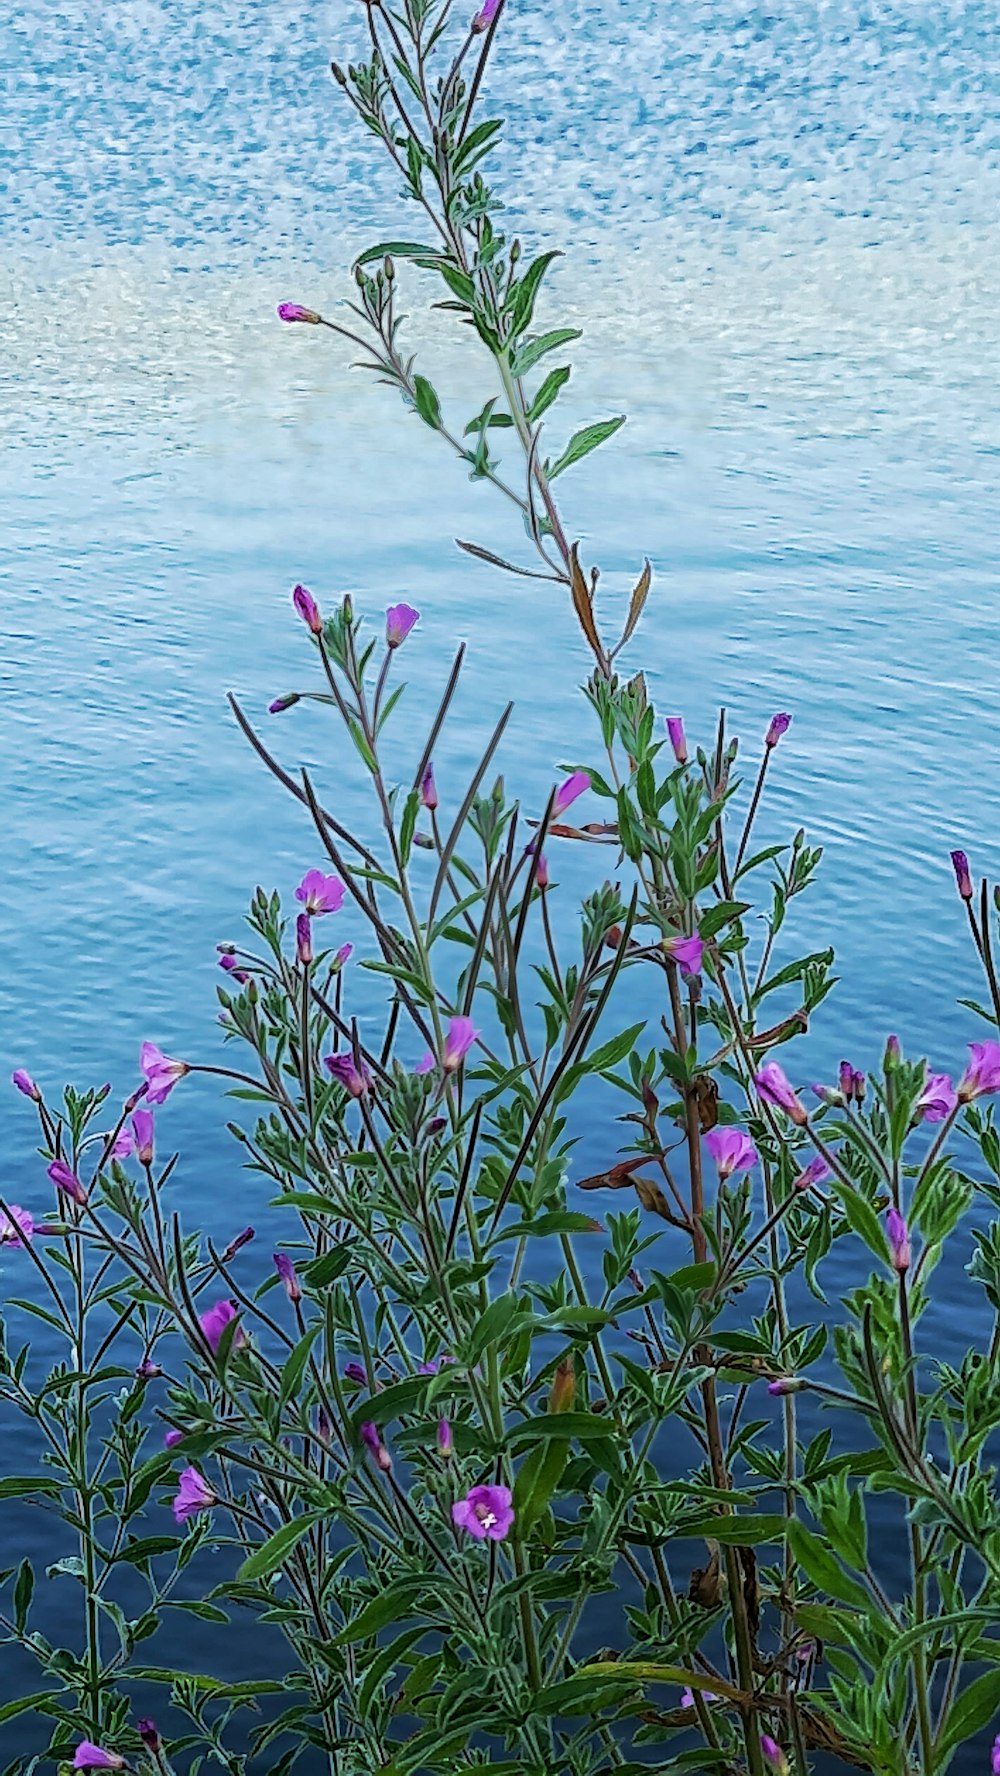 a plant with purple flowers in front of a body of water